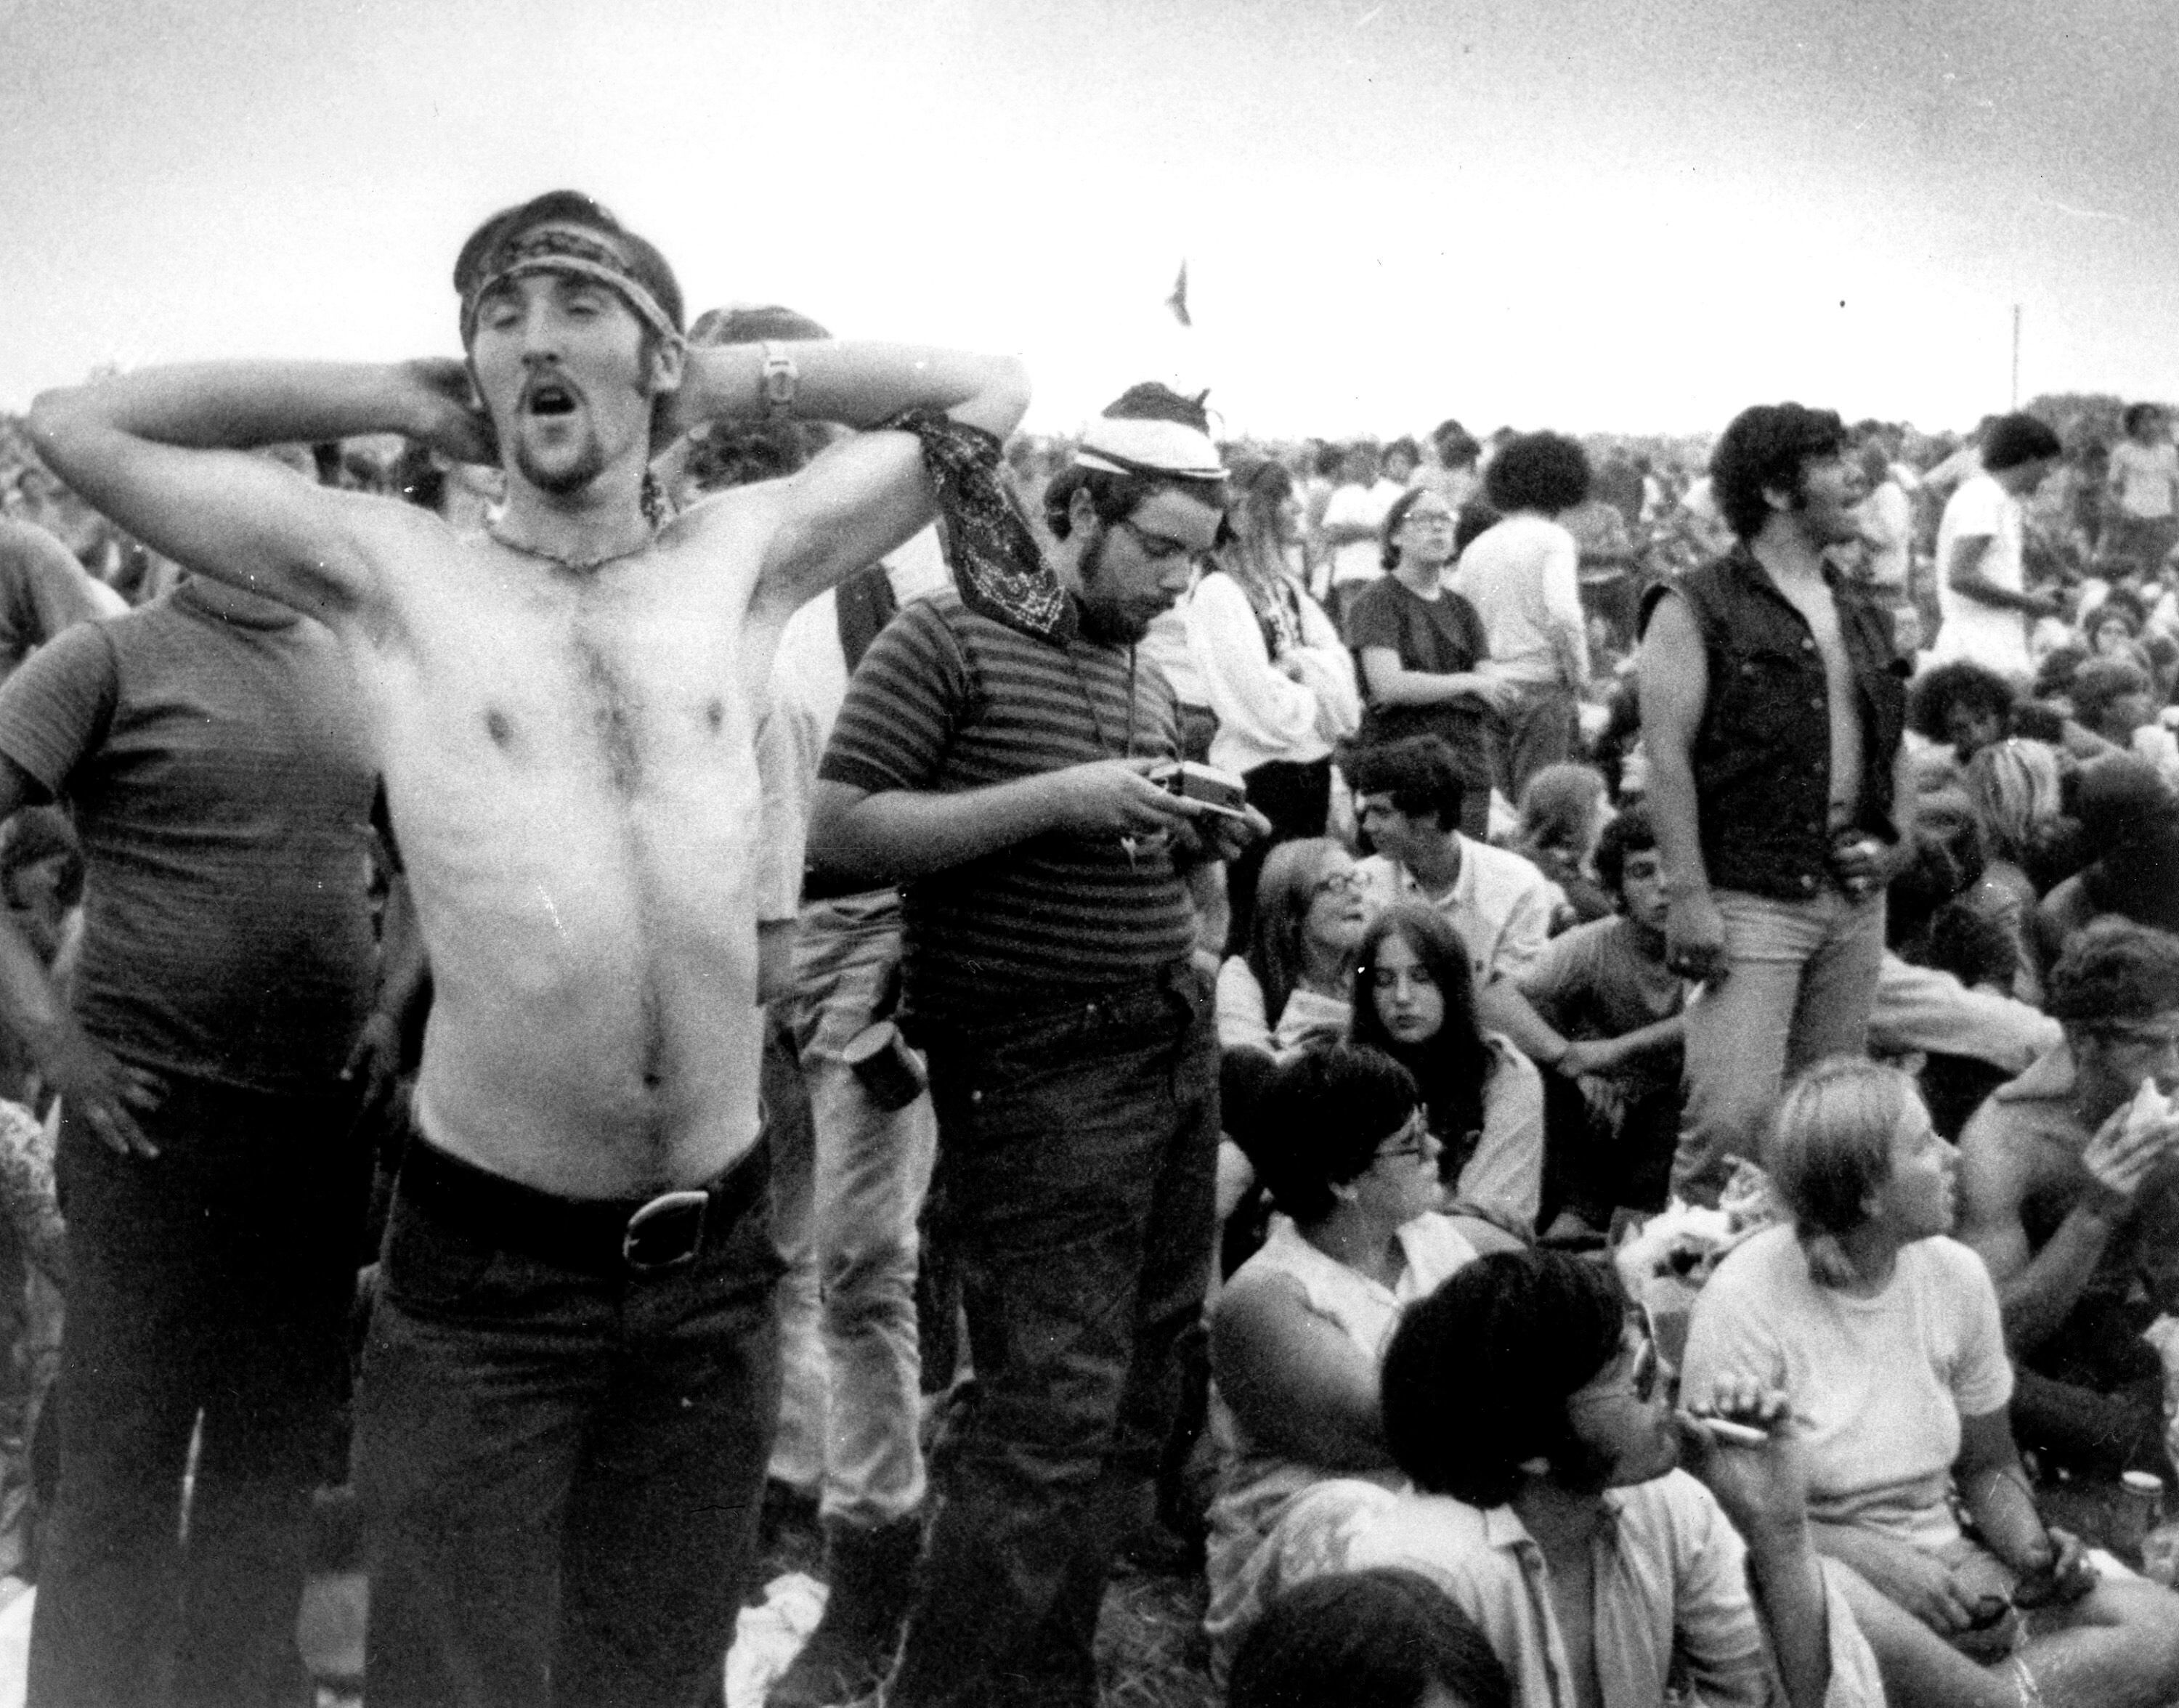 How the Grateful Dead blew their set at Woodstock